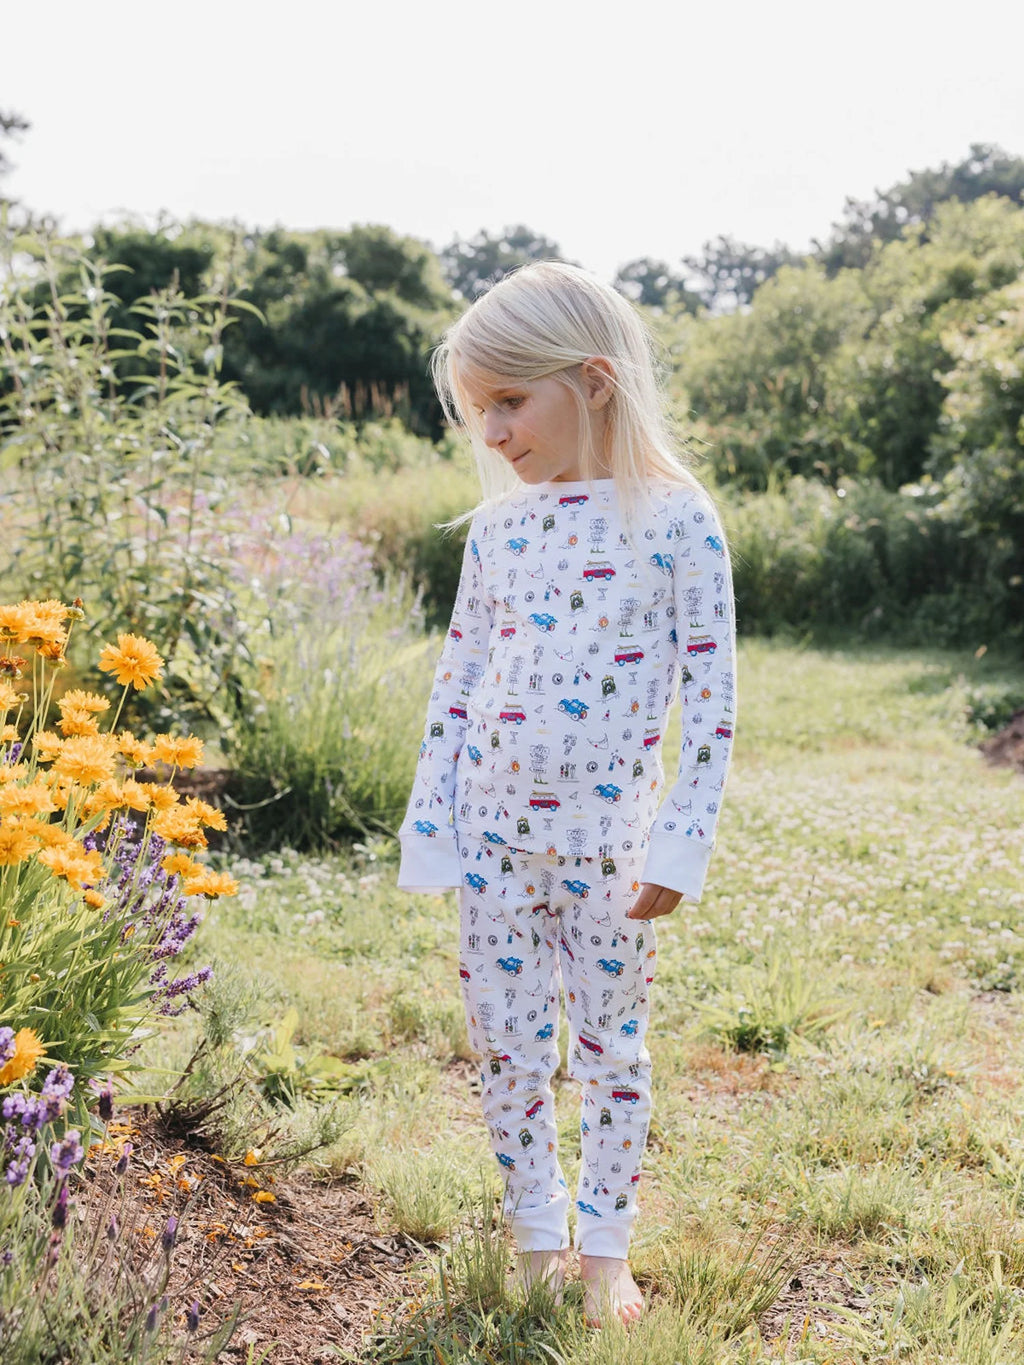 A little girl, wearing adorable Erica Wilson pajamas, captivates the moment with wide-eyed wonder while gazing at vibrant flowers